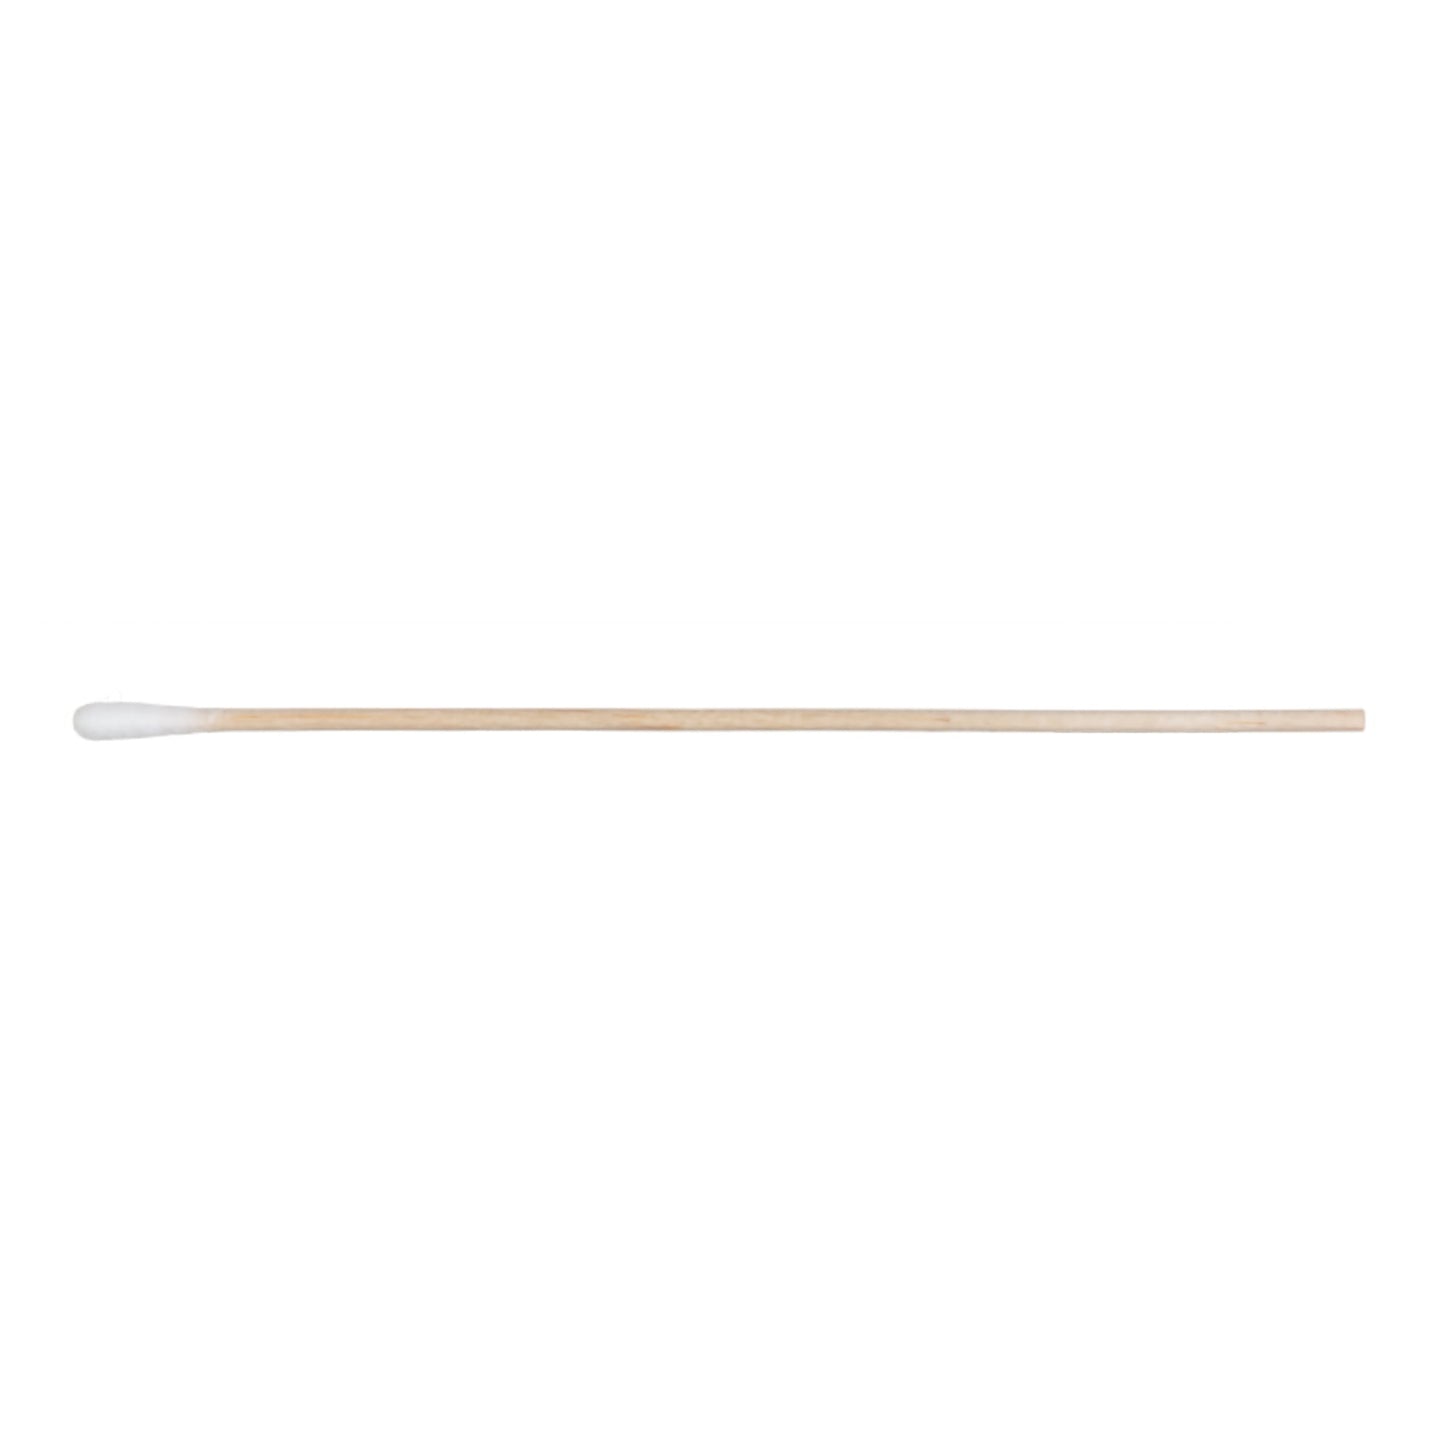 Puritan Cotton Tipped Wood Swabstick, Sold As 1000/Case Puritan 25-806 1Wc